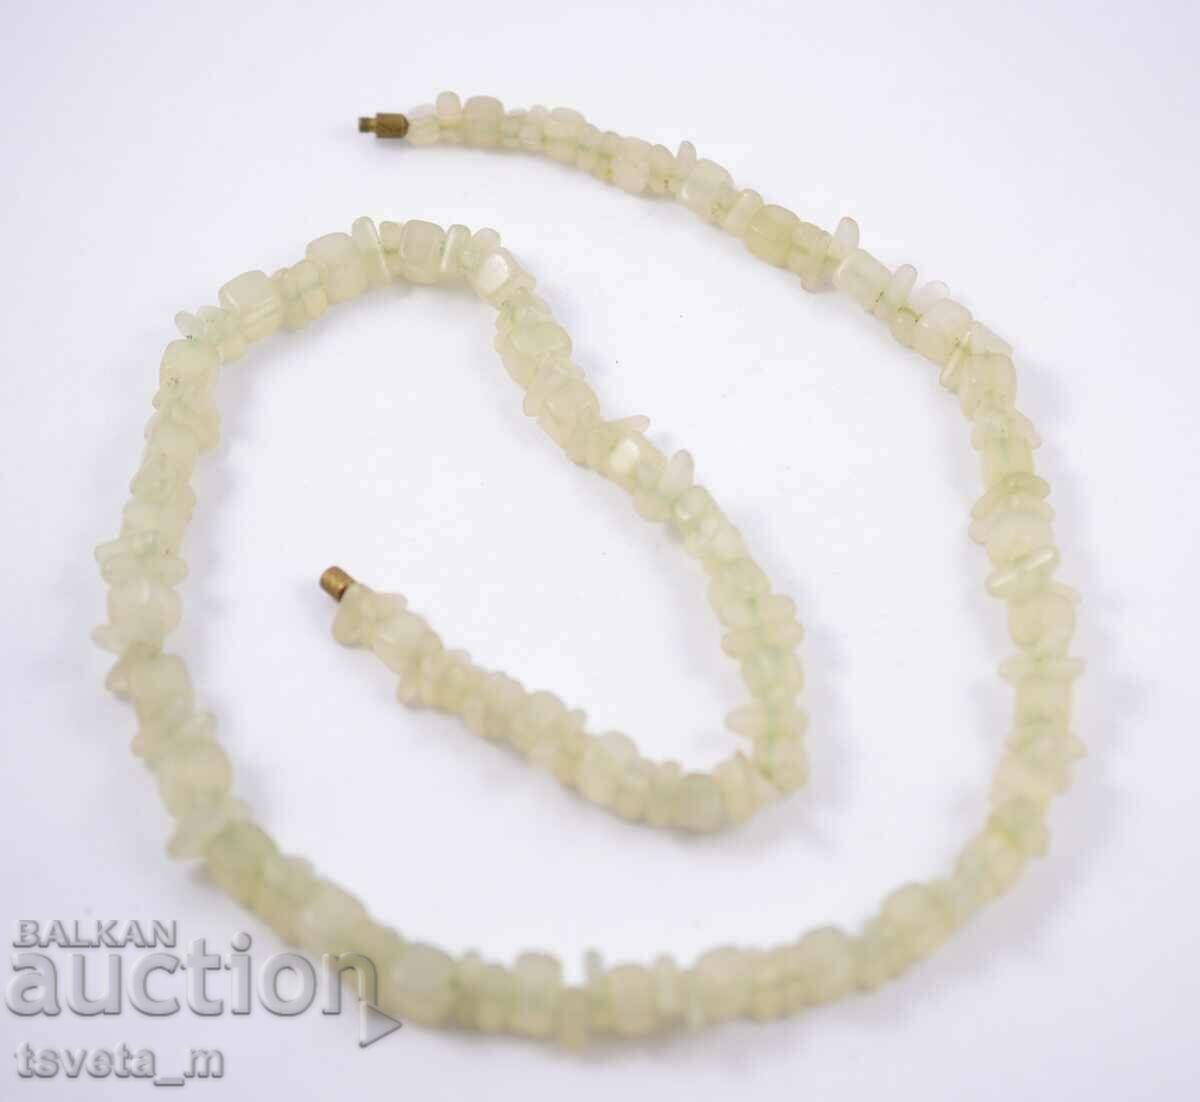 Necklace with natural stones